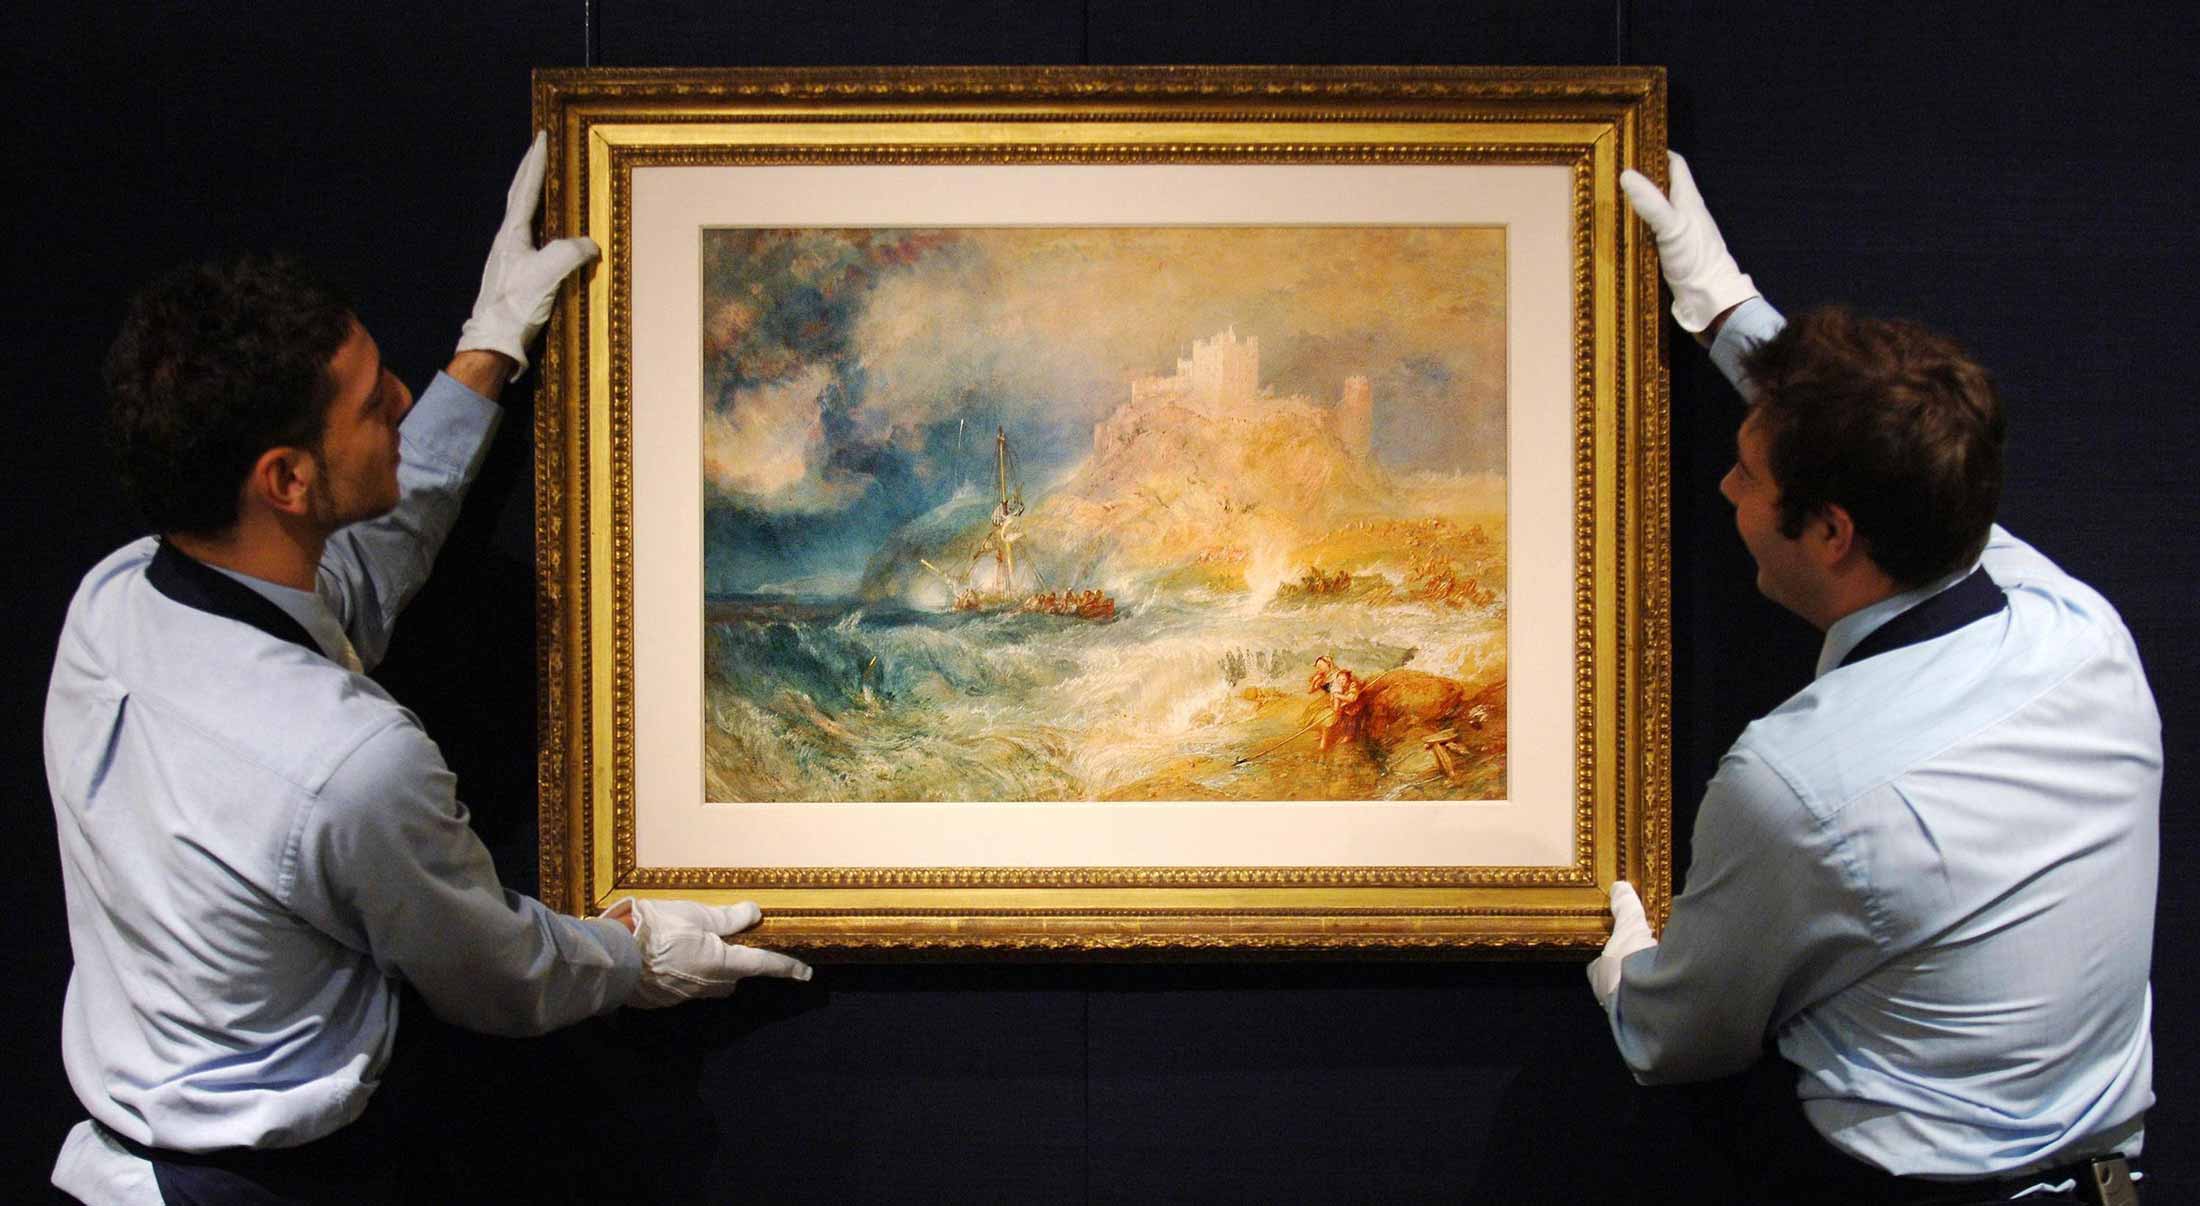 The ten J. M. W. Turner paintings every man needs to see, British GQ